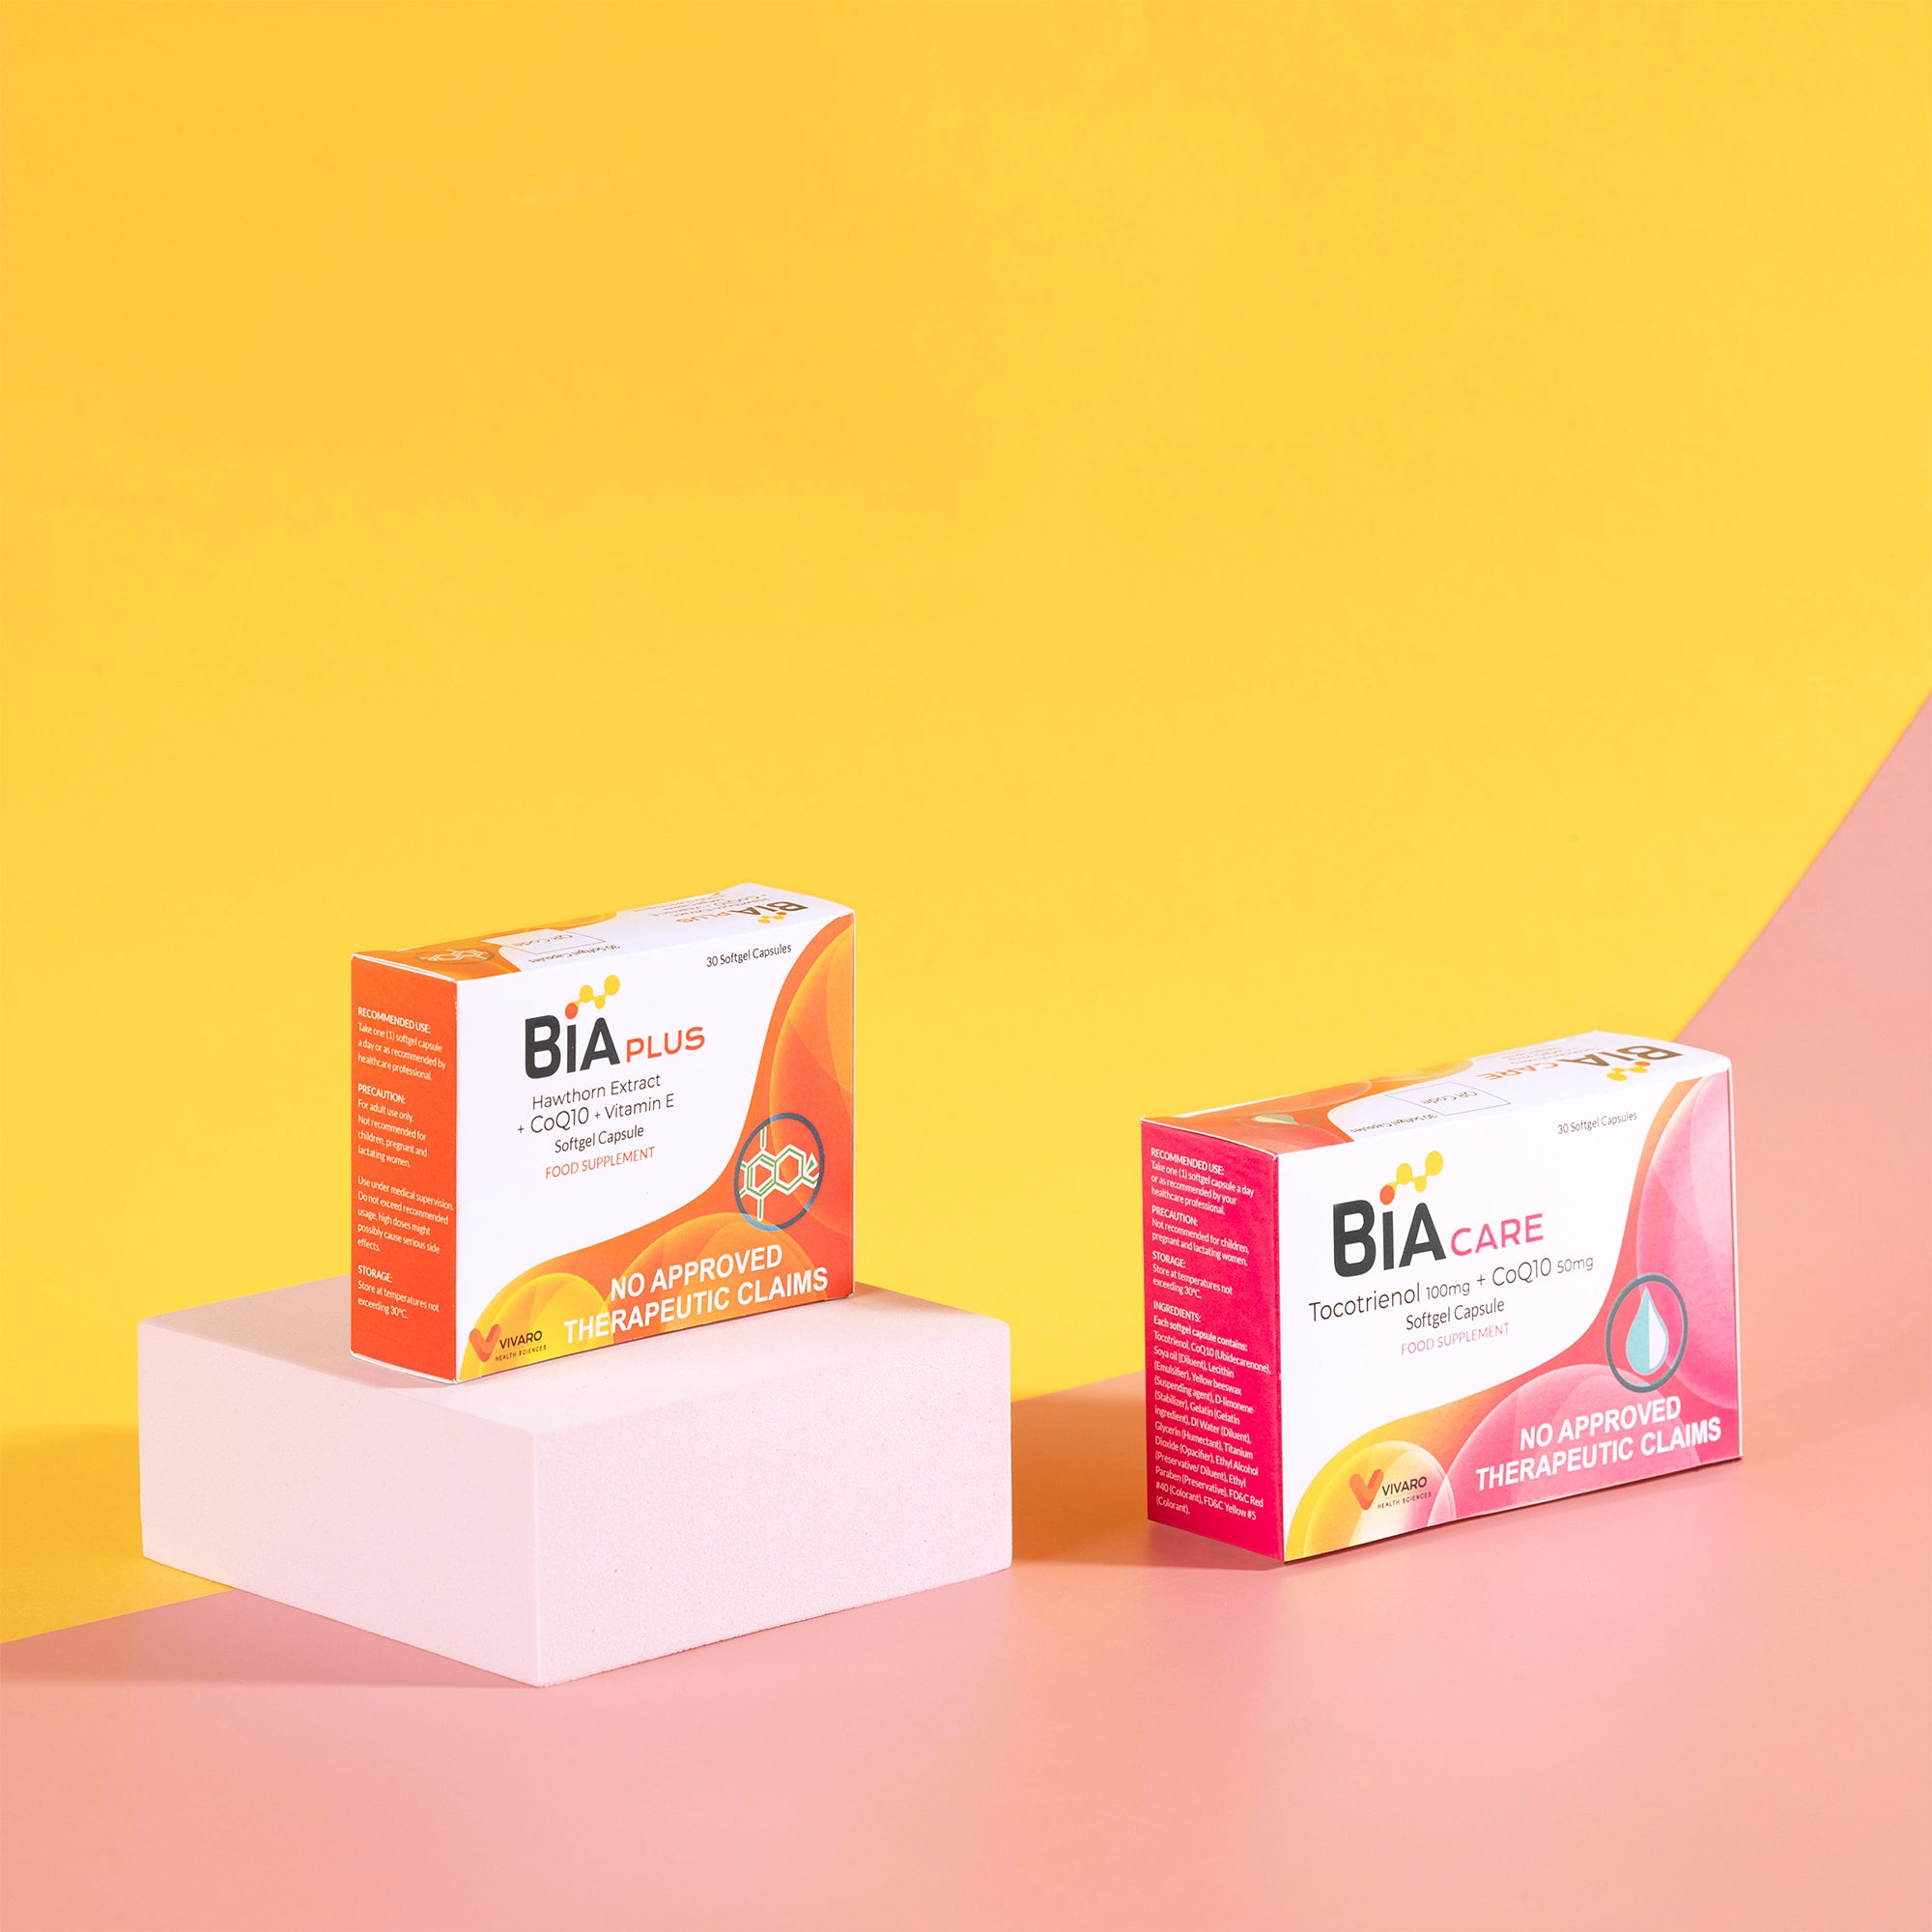 Young at Heart Promo Bundle (Bia Plus + Bia Care)